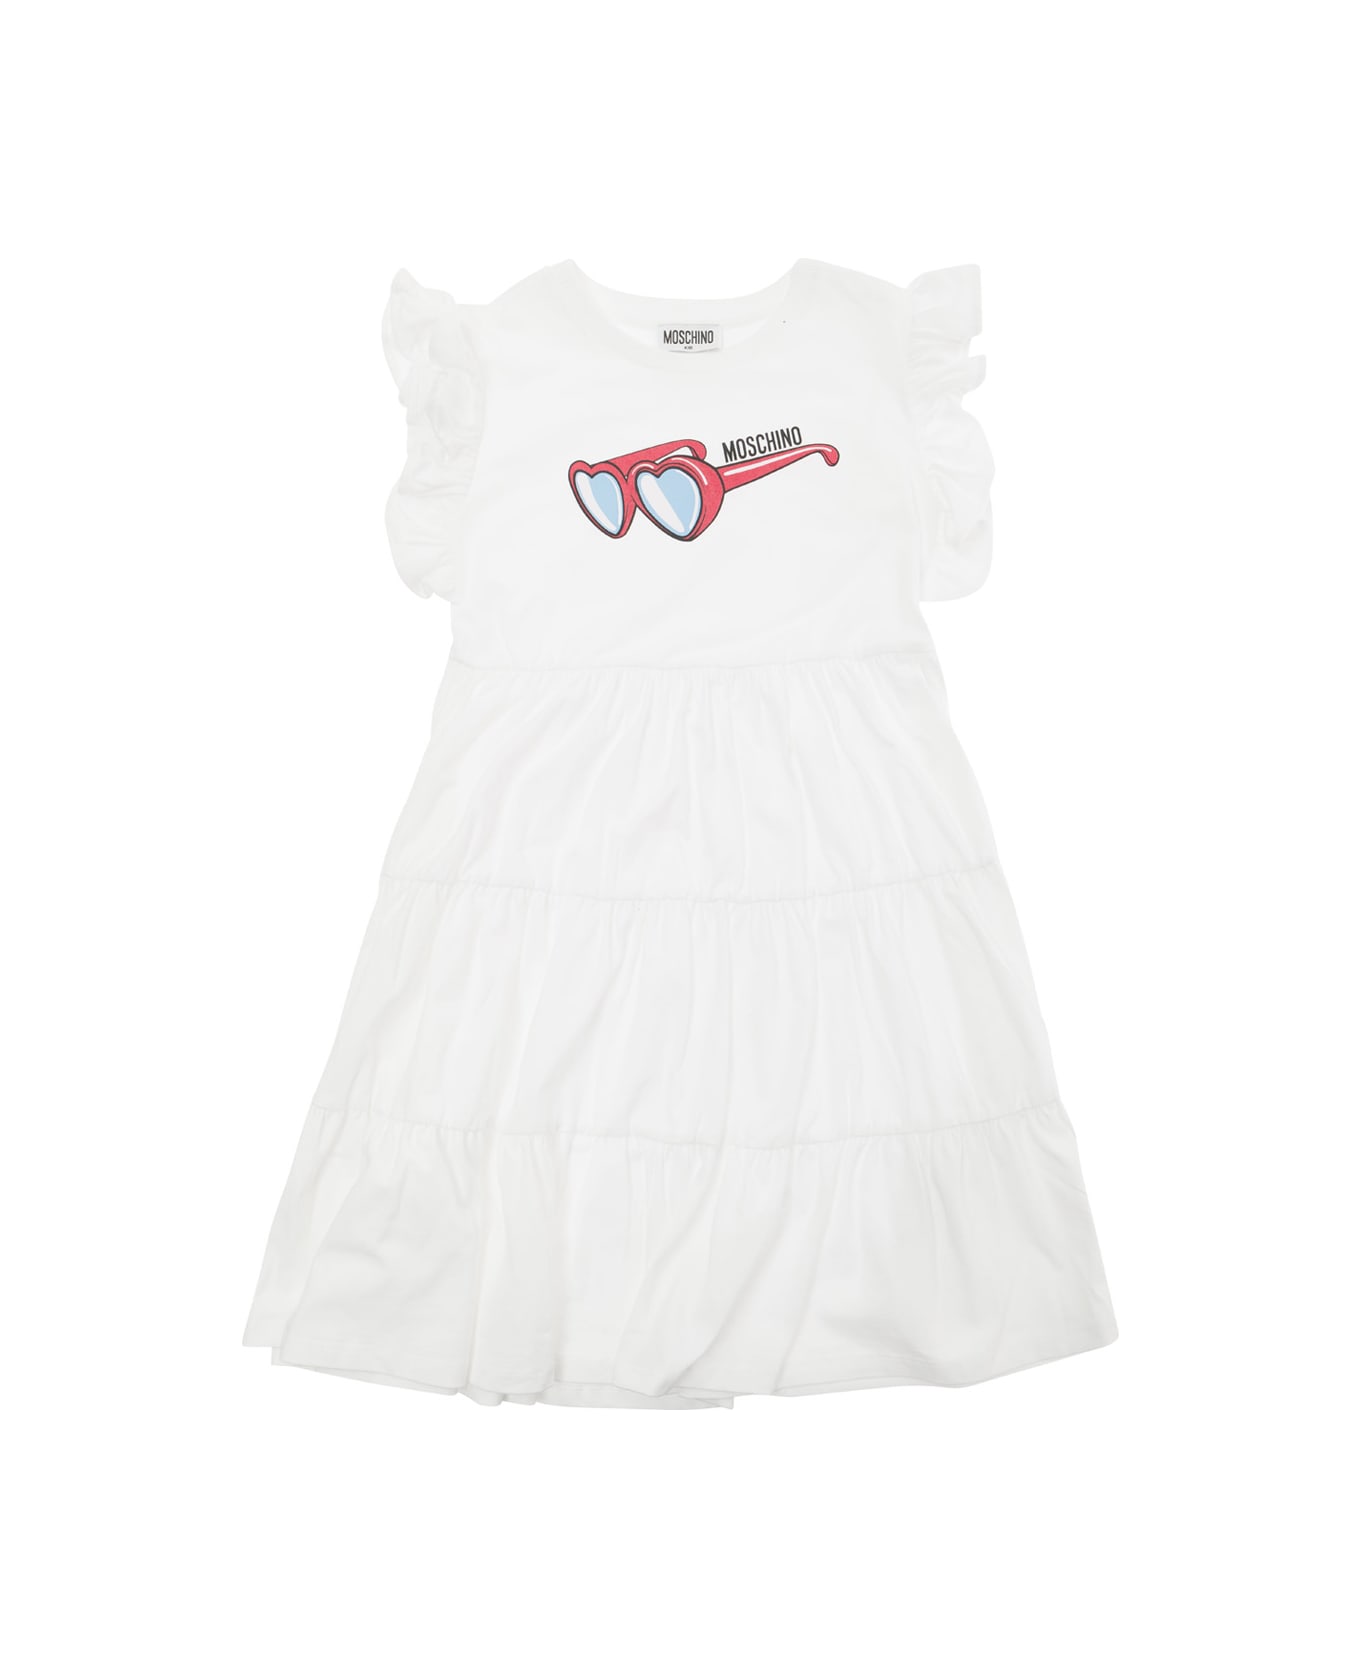 Moschino White Flounced Dress With Sunglasses Print In Stretch Cotton Girl - White